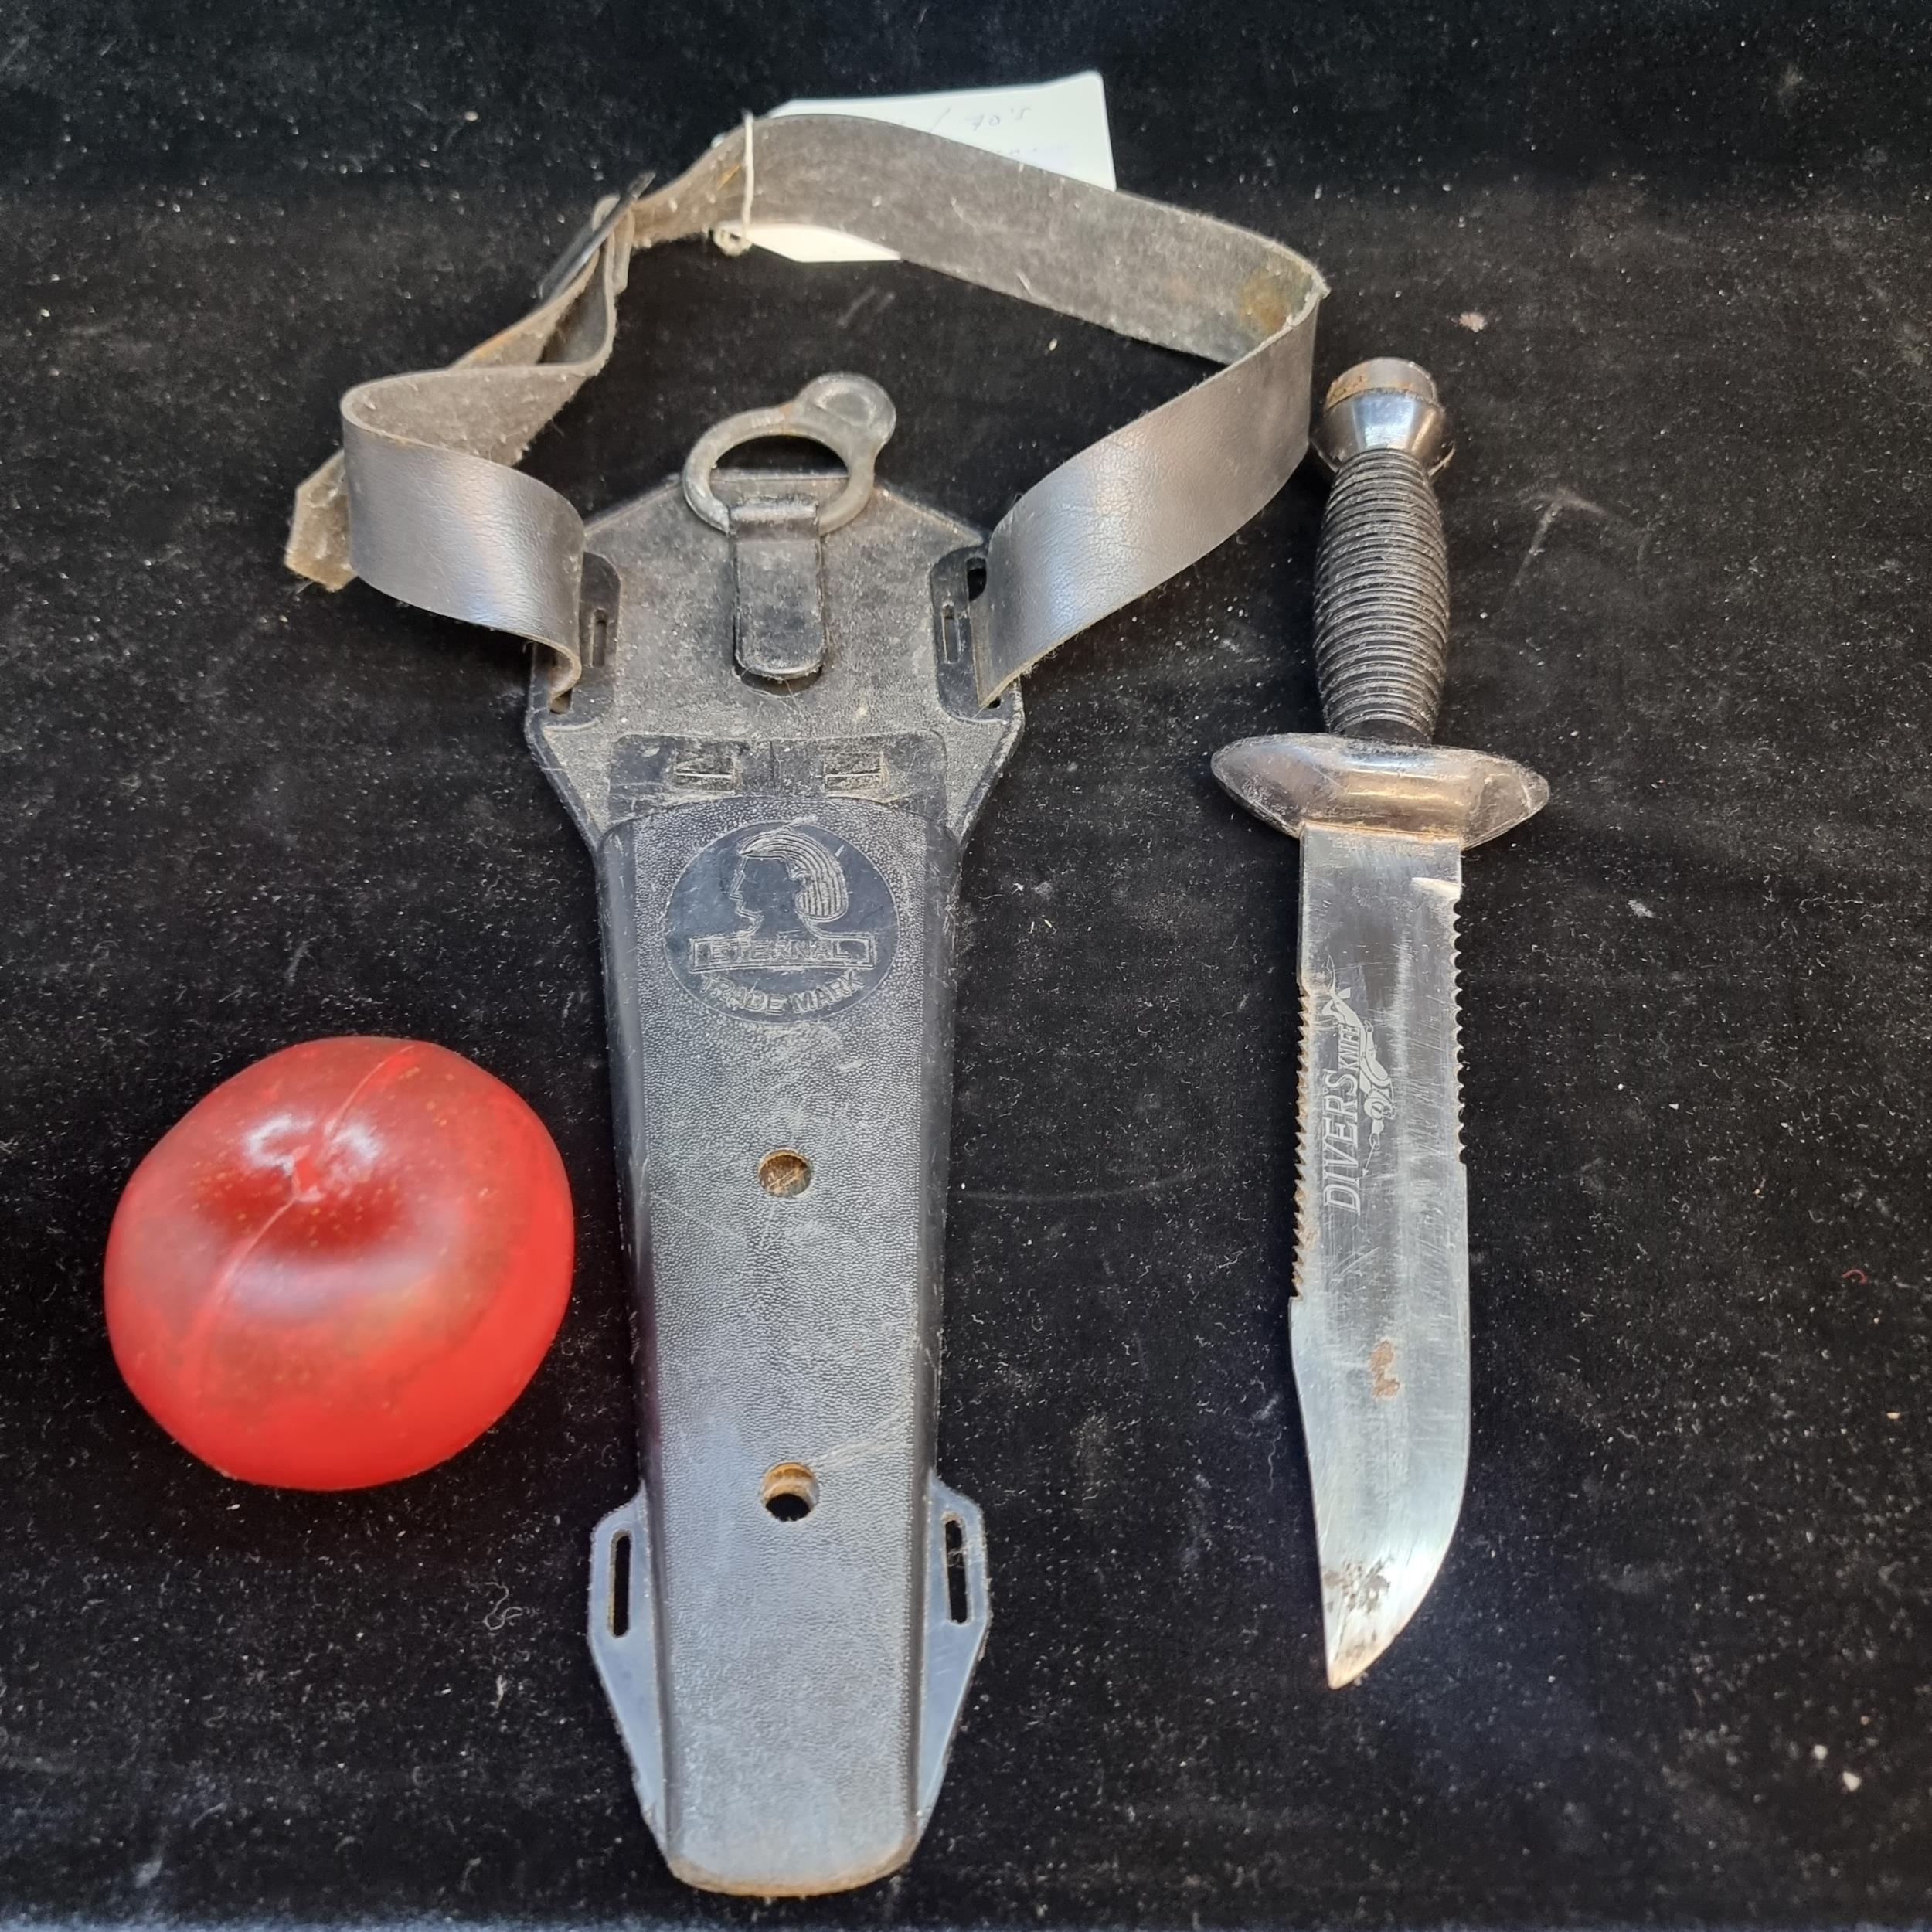 A vintage stainless steel scuba diving knife made by Eternal